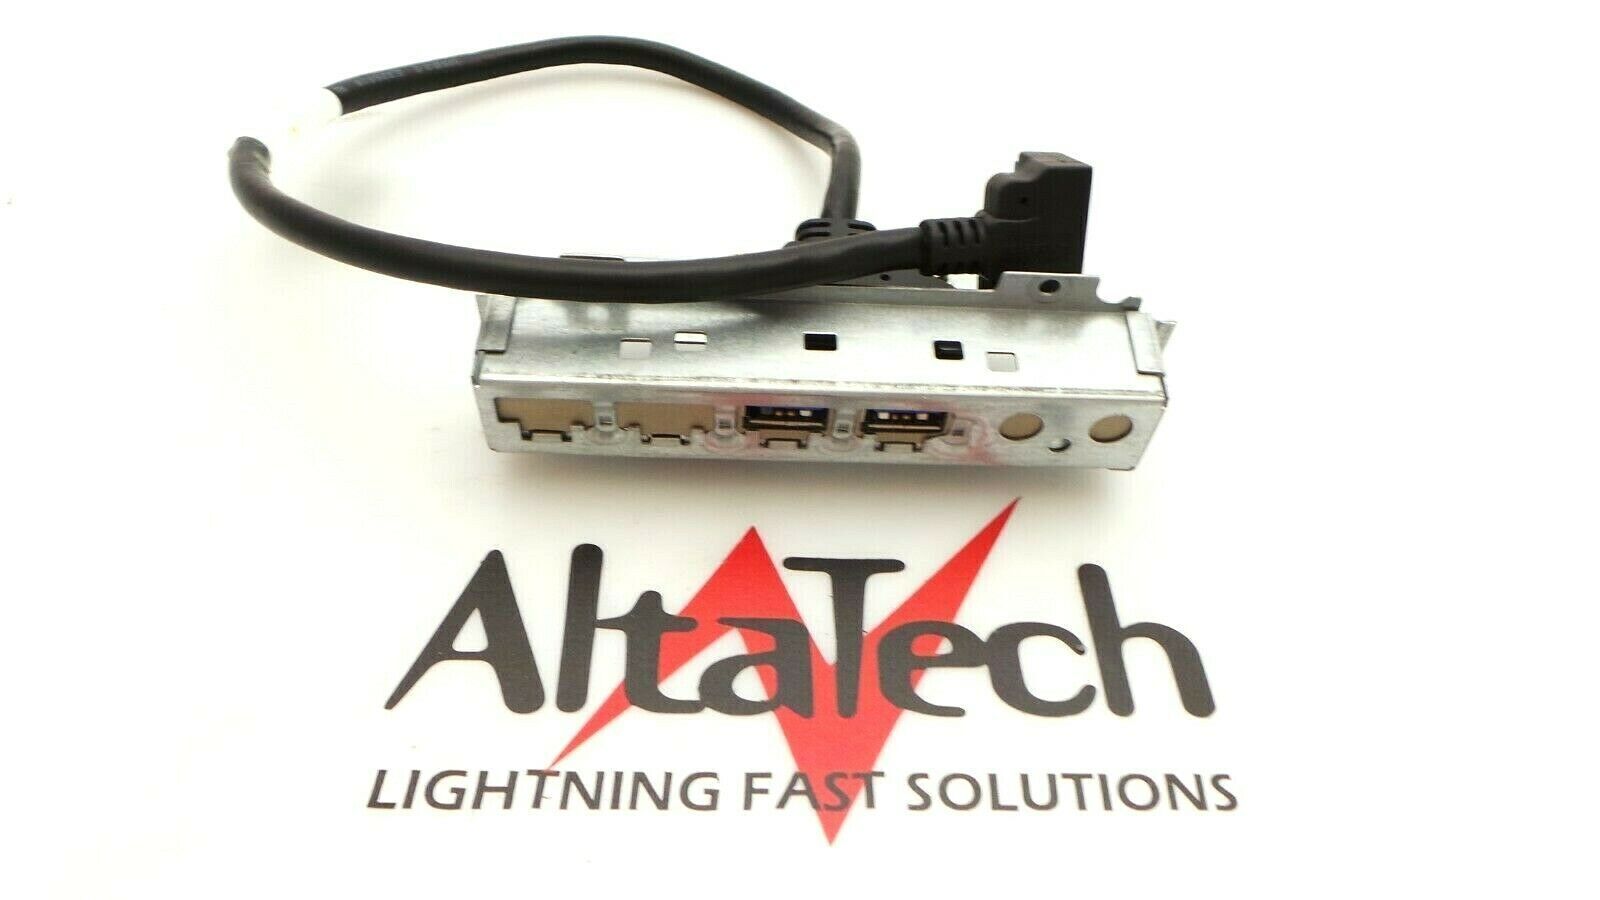 Fujitsu T26139-Y3999-V501 2-Port USB 3.0 Front Panel Cable Assembly - Tested